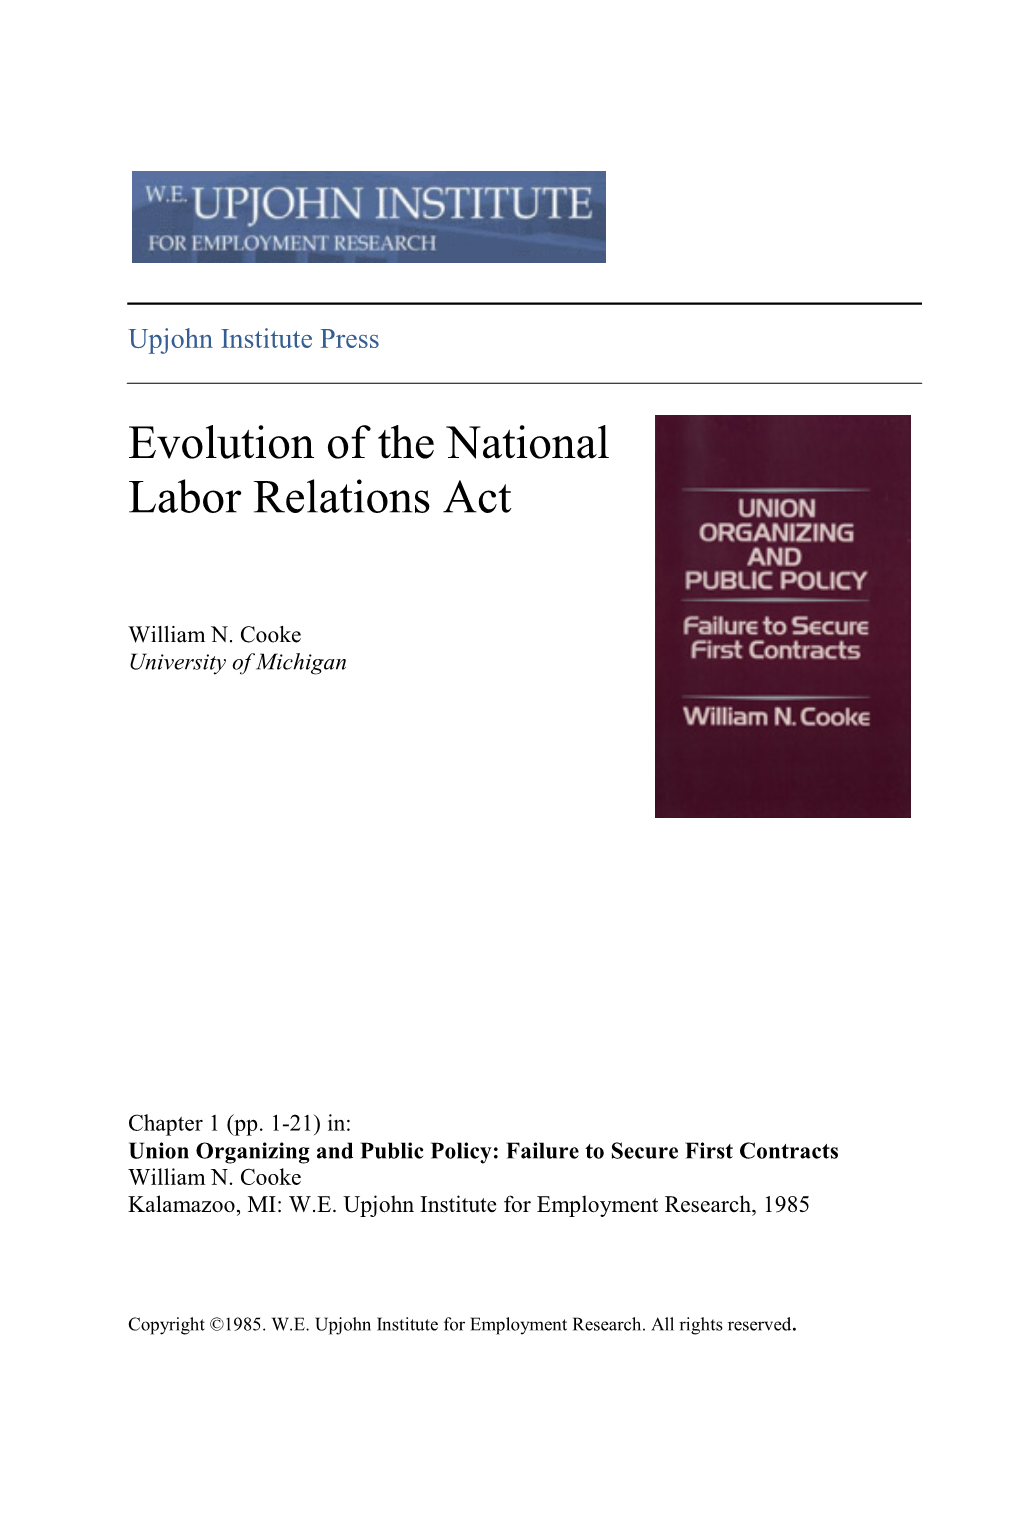 Evolution of the National Labor Relations Act